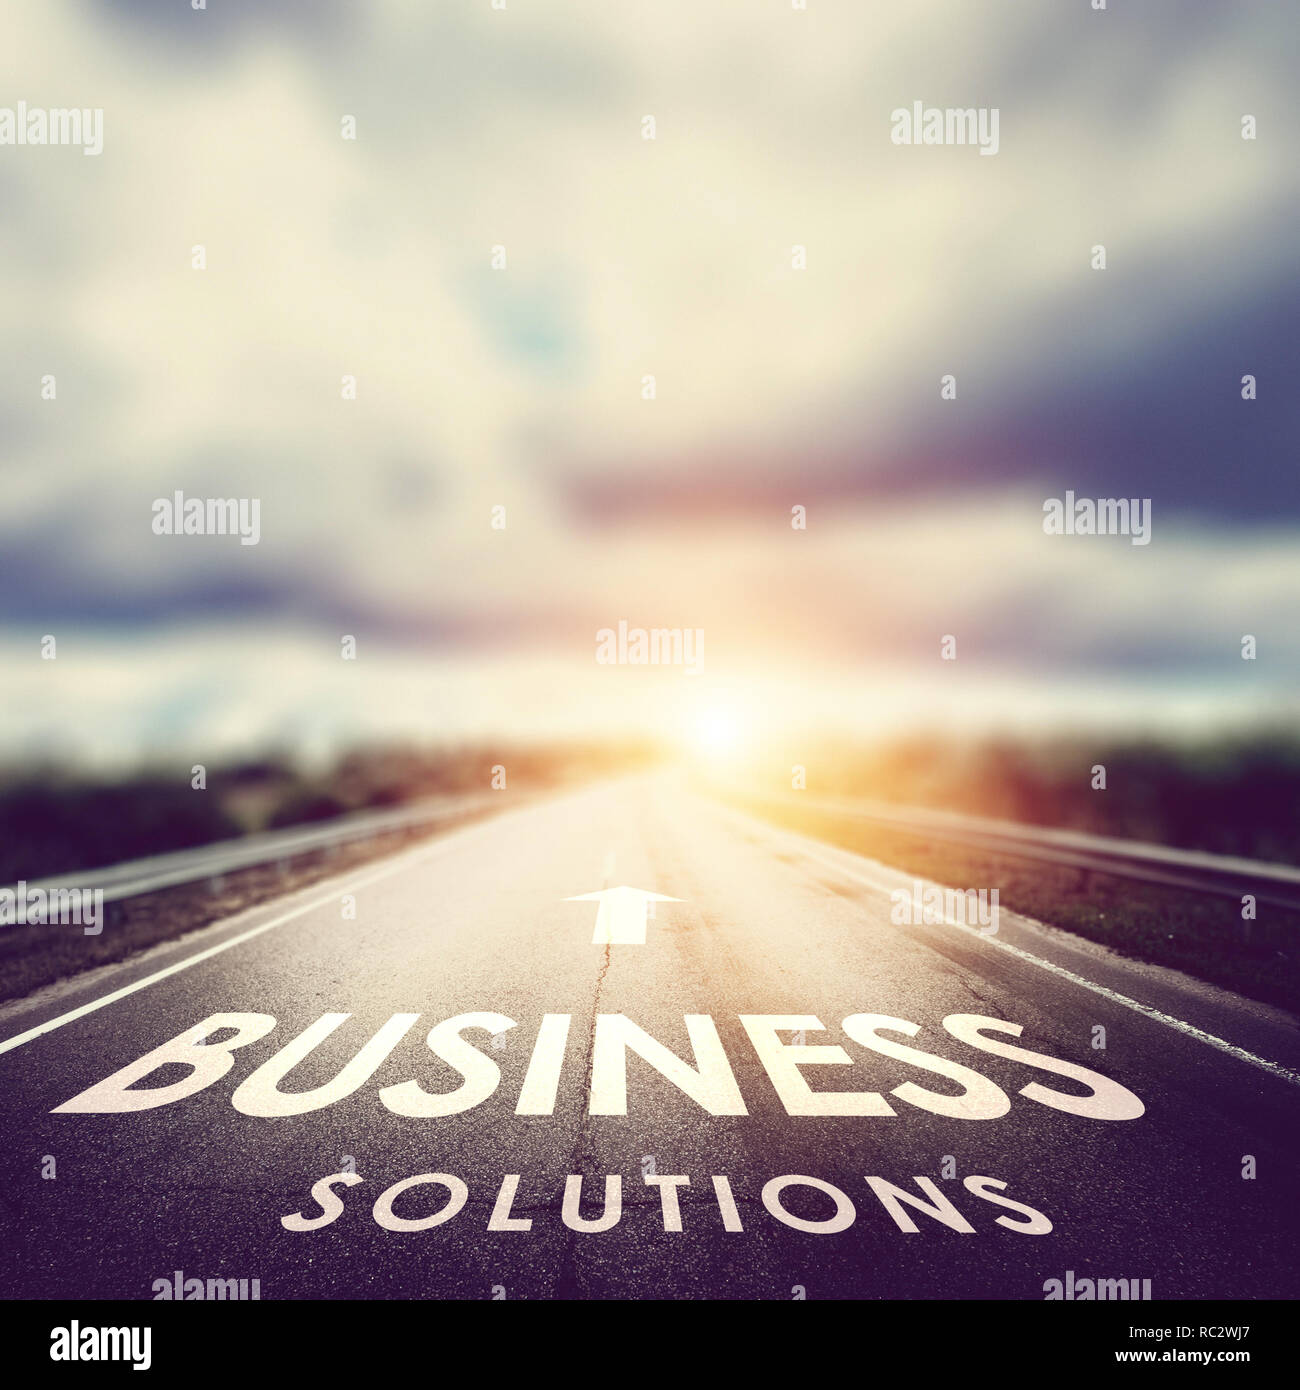 Business solutions background Stock Photo